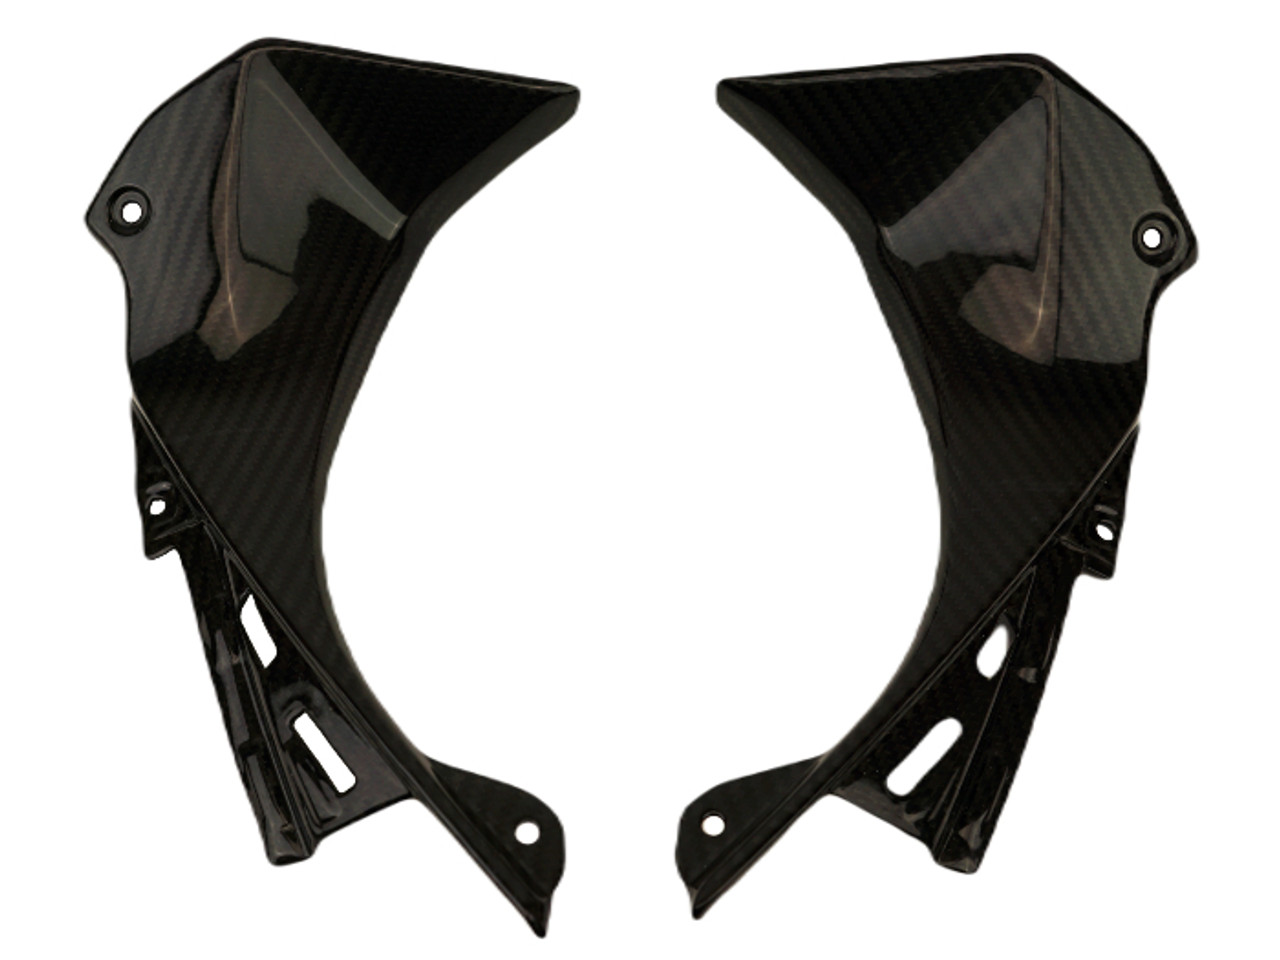 Top Air Duct Covers in Glossy Twill Weave Carbon Fiber for Kawasaki ZX6R 2019-2023

